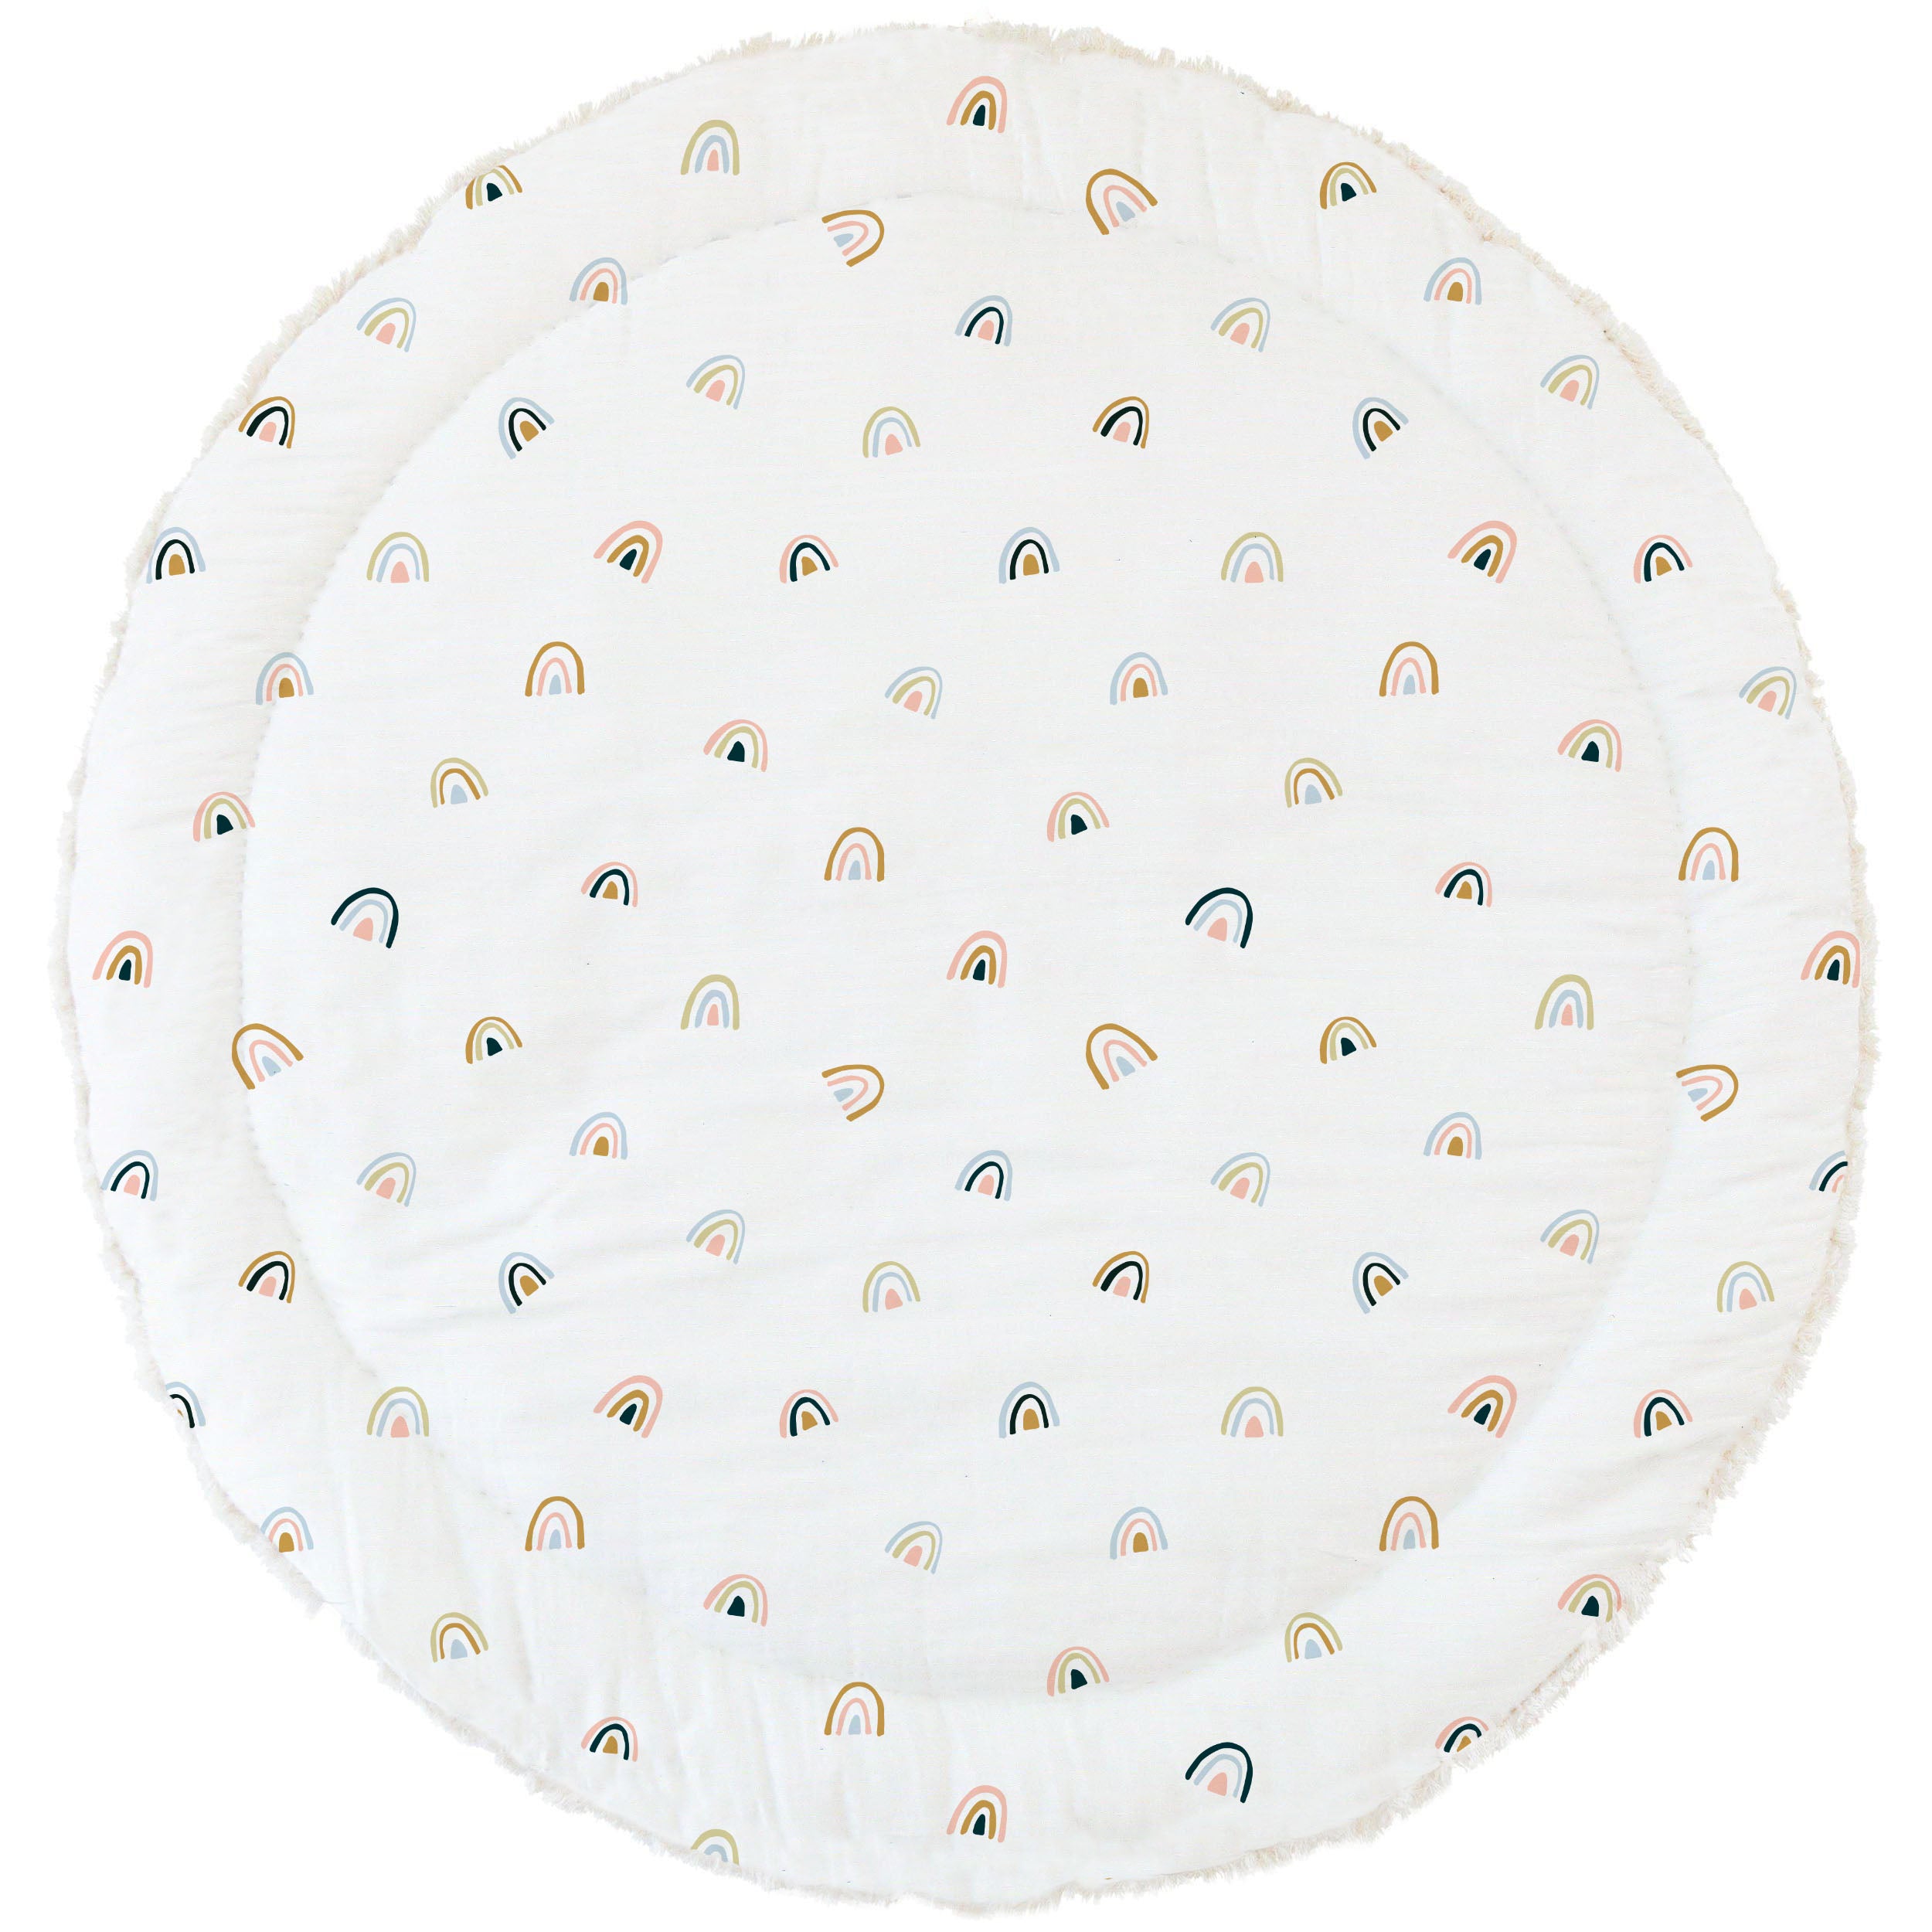 Round, plush baby mat with a pattern of multicolored rainbows on a white background, viewed from above: Organic Cotton Quilted Reversible Play Mat - Rainbow and Ivory by Makemake Organics.